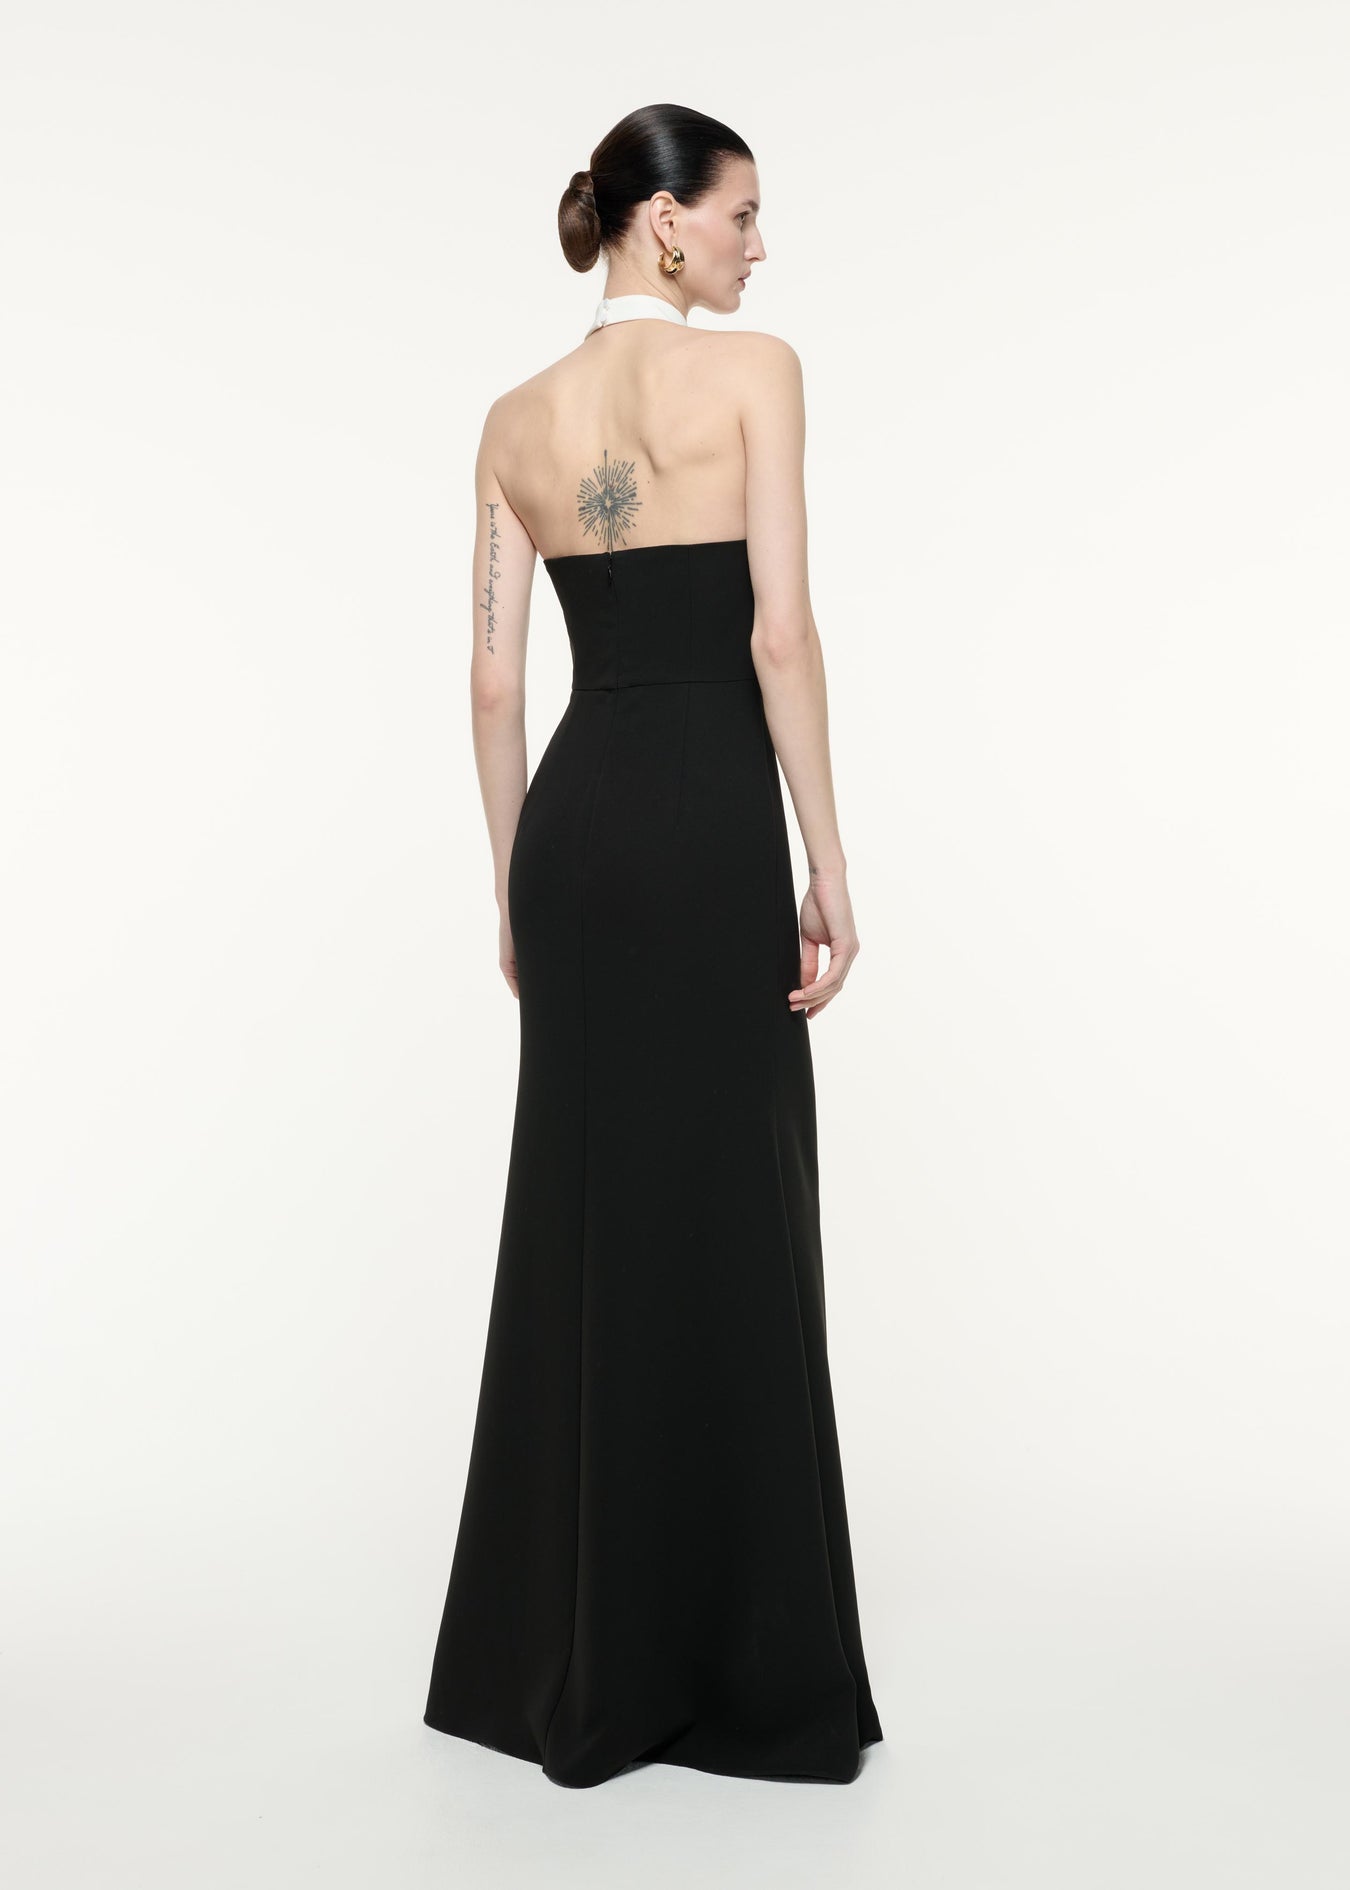 A back view image of a model wearing the Halter Neck Gown in Monochrome